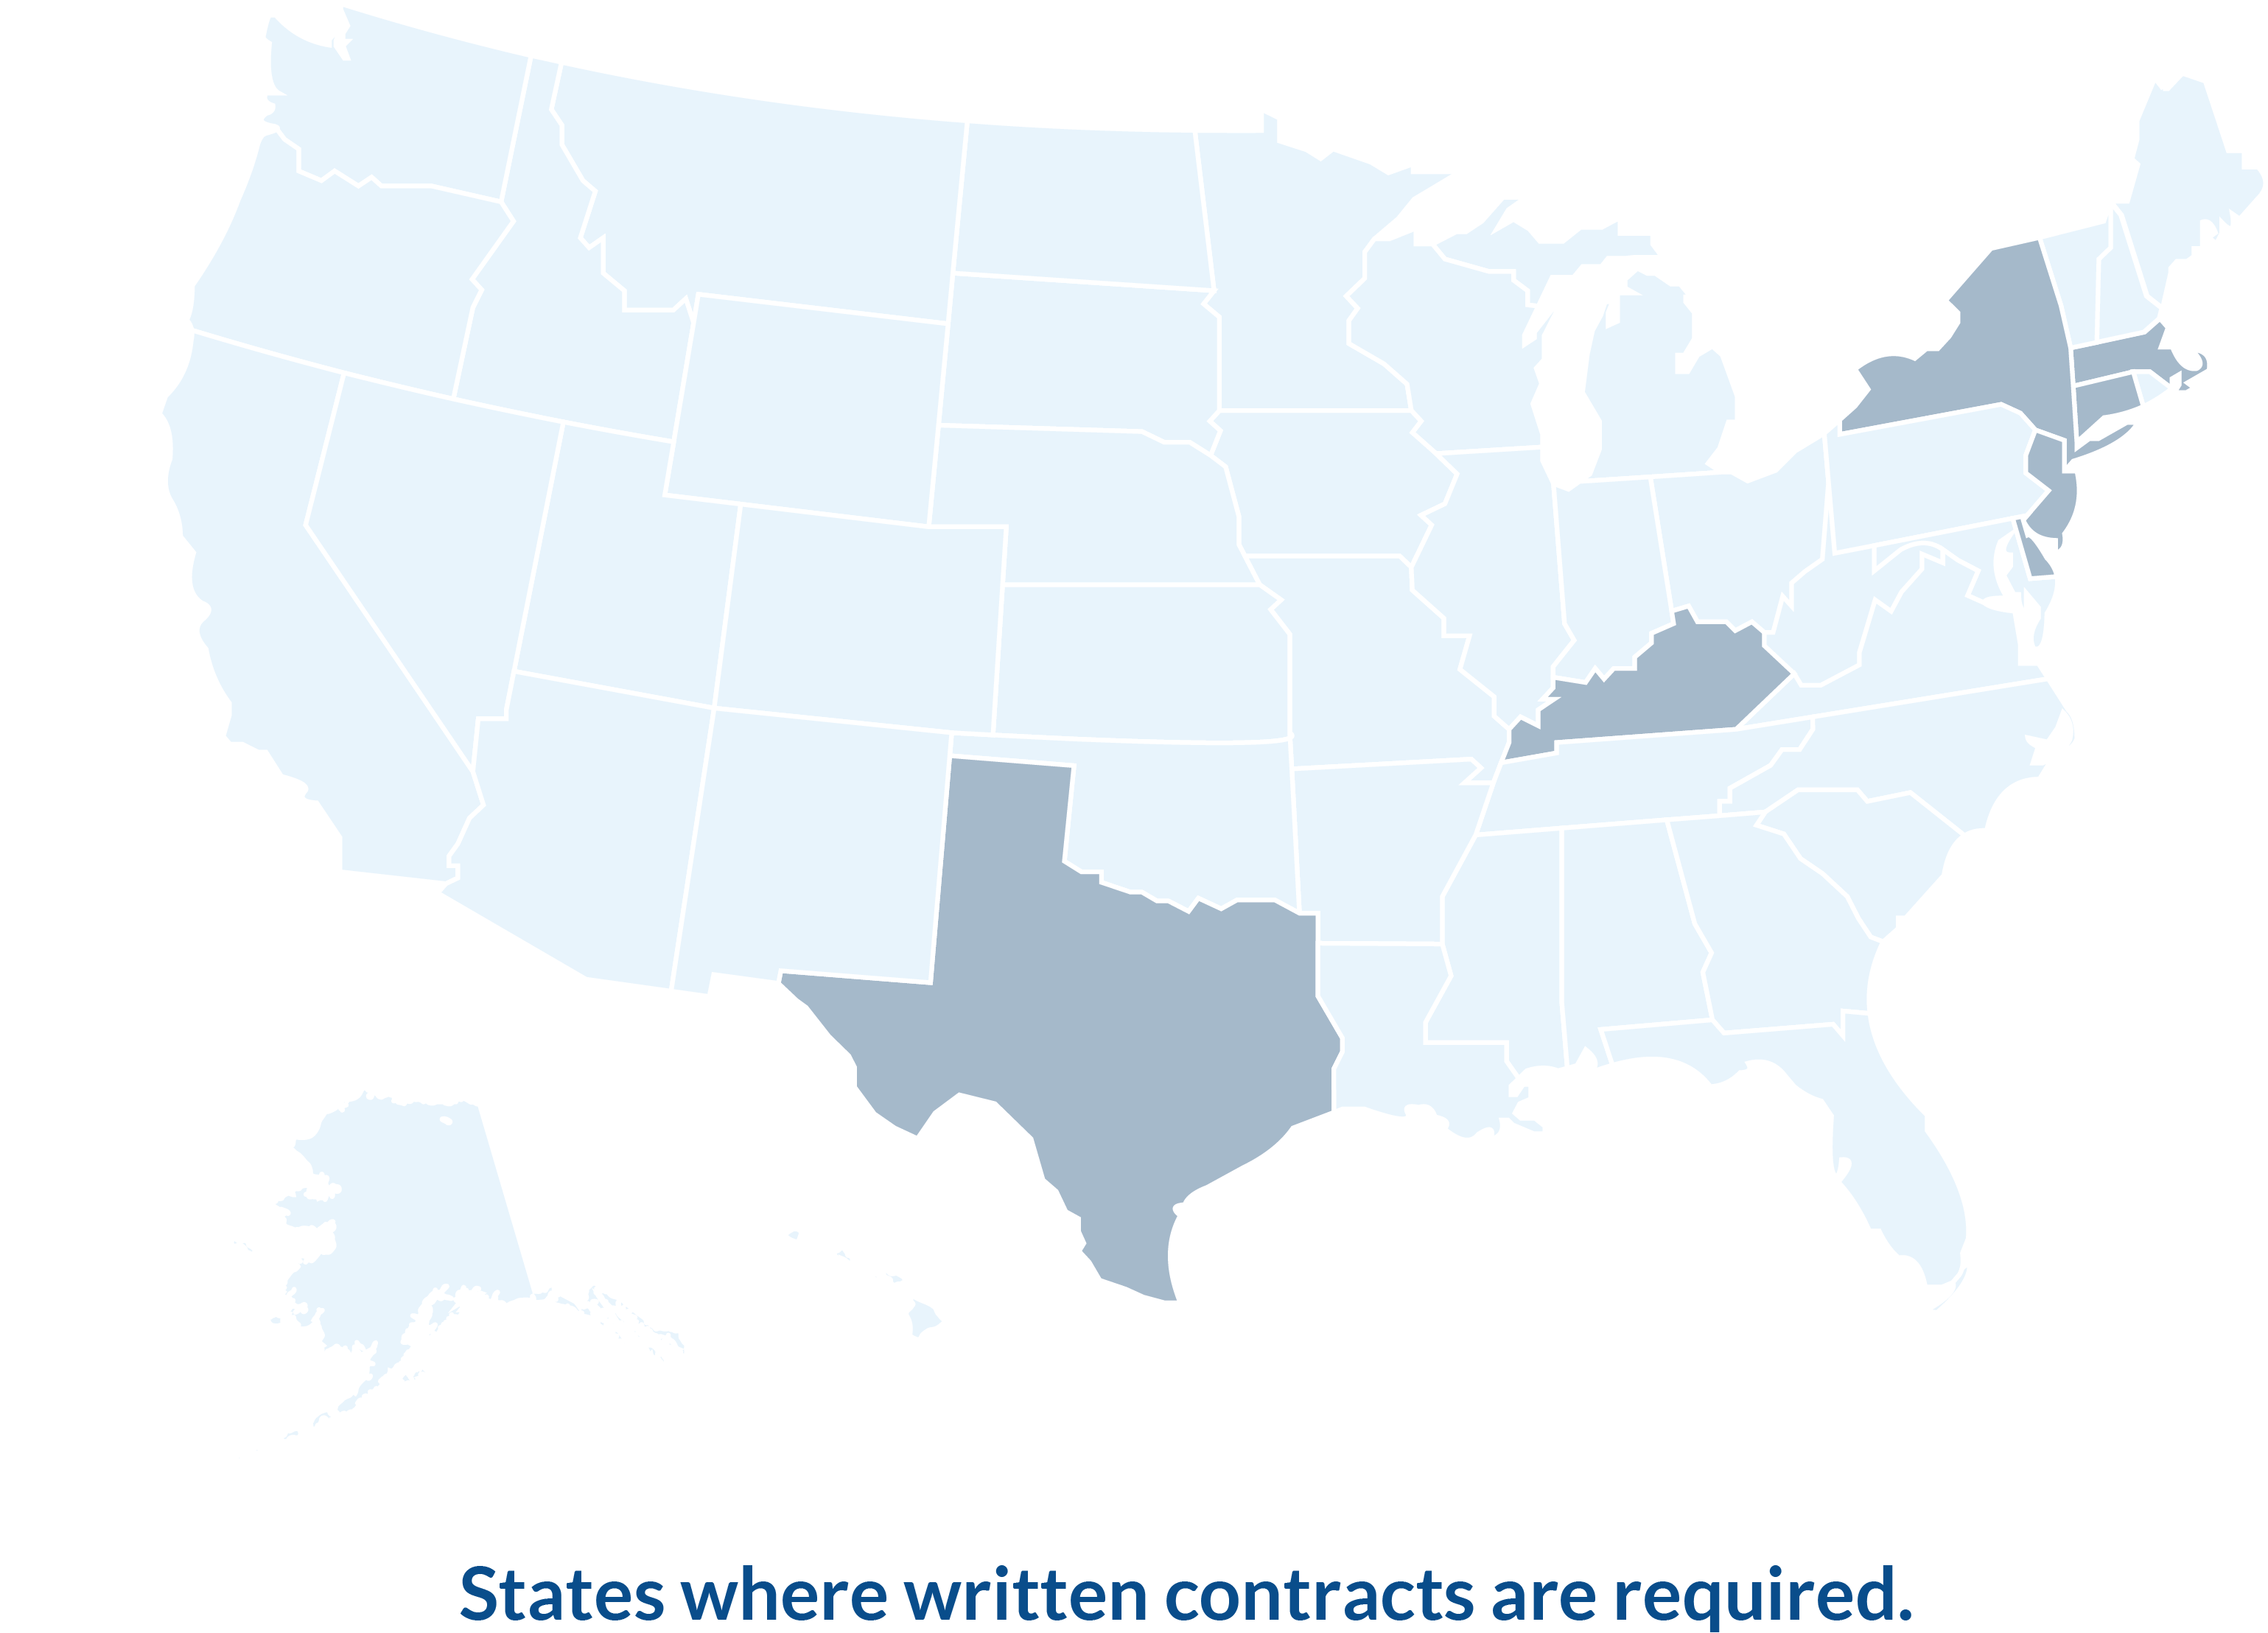 States where written contracts are required.